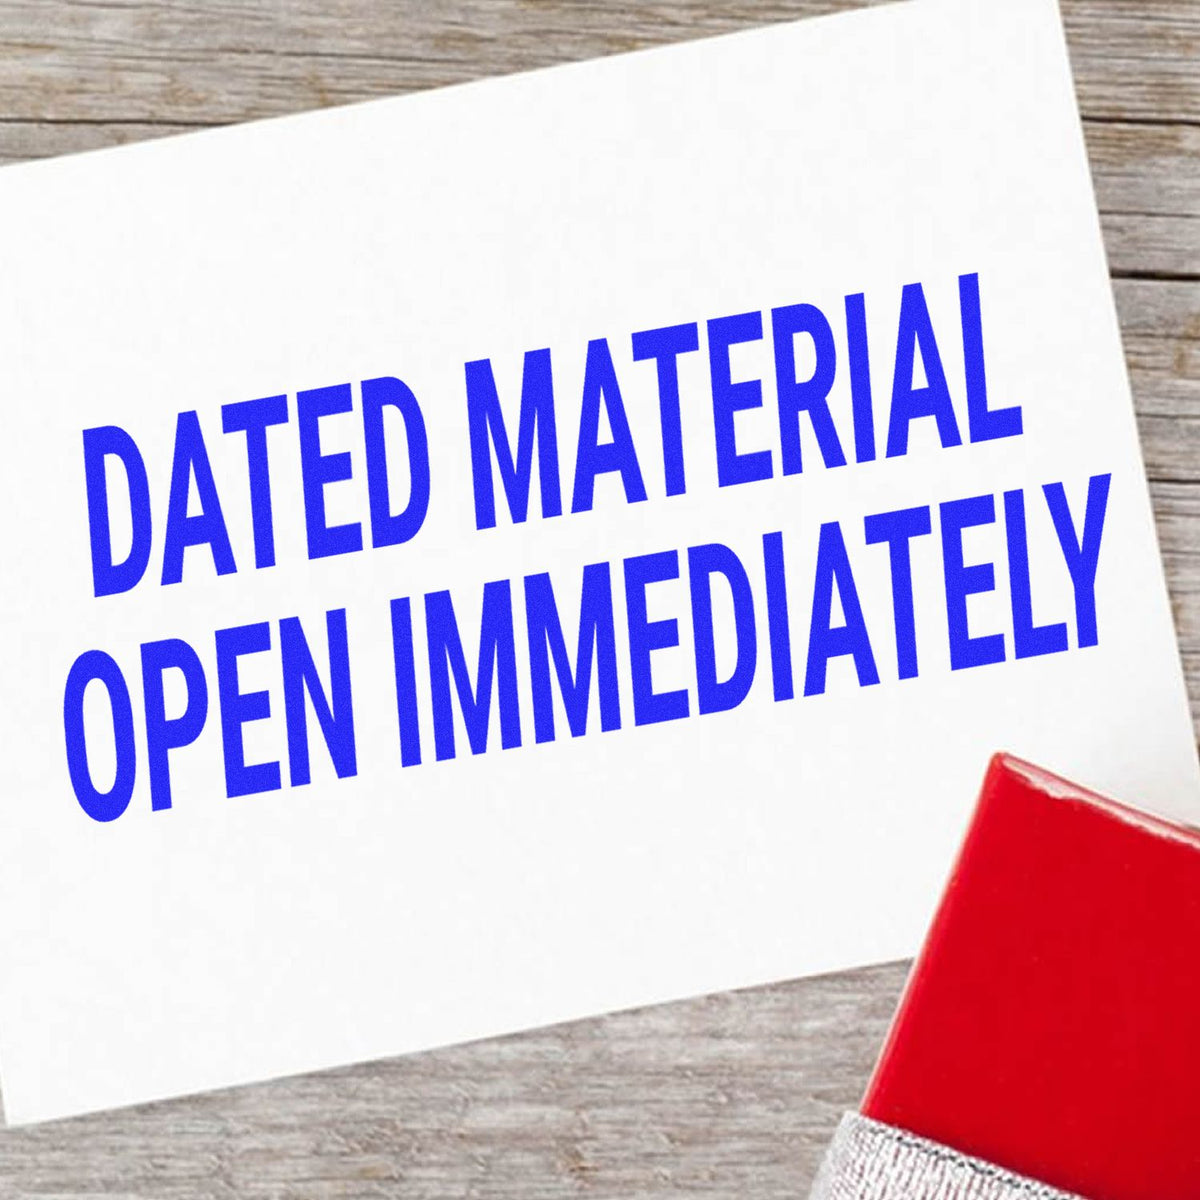 Dated Material Open Immediately Rubber Stamp In Use Photo